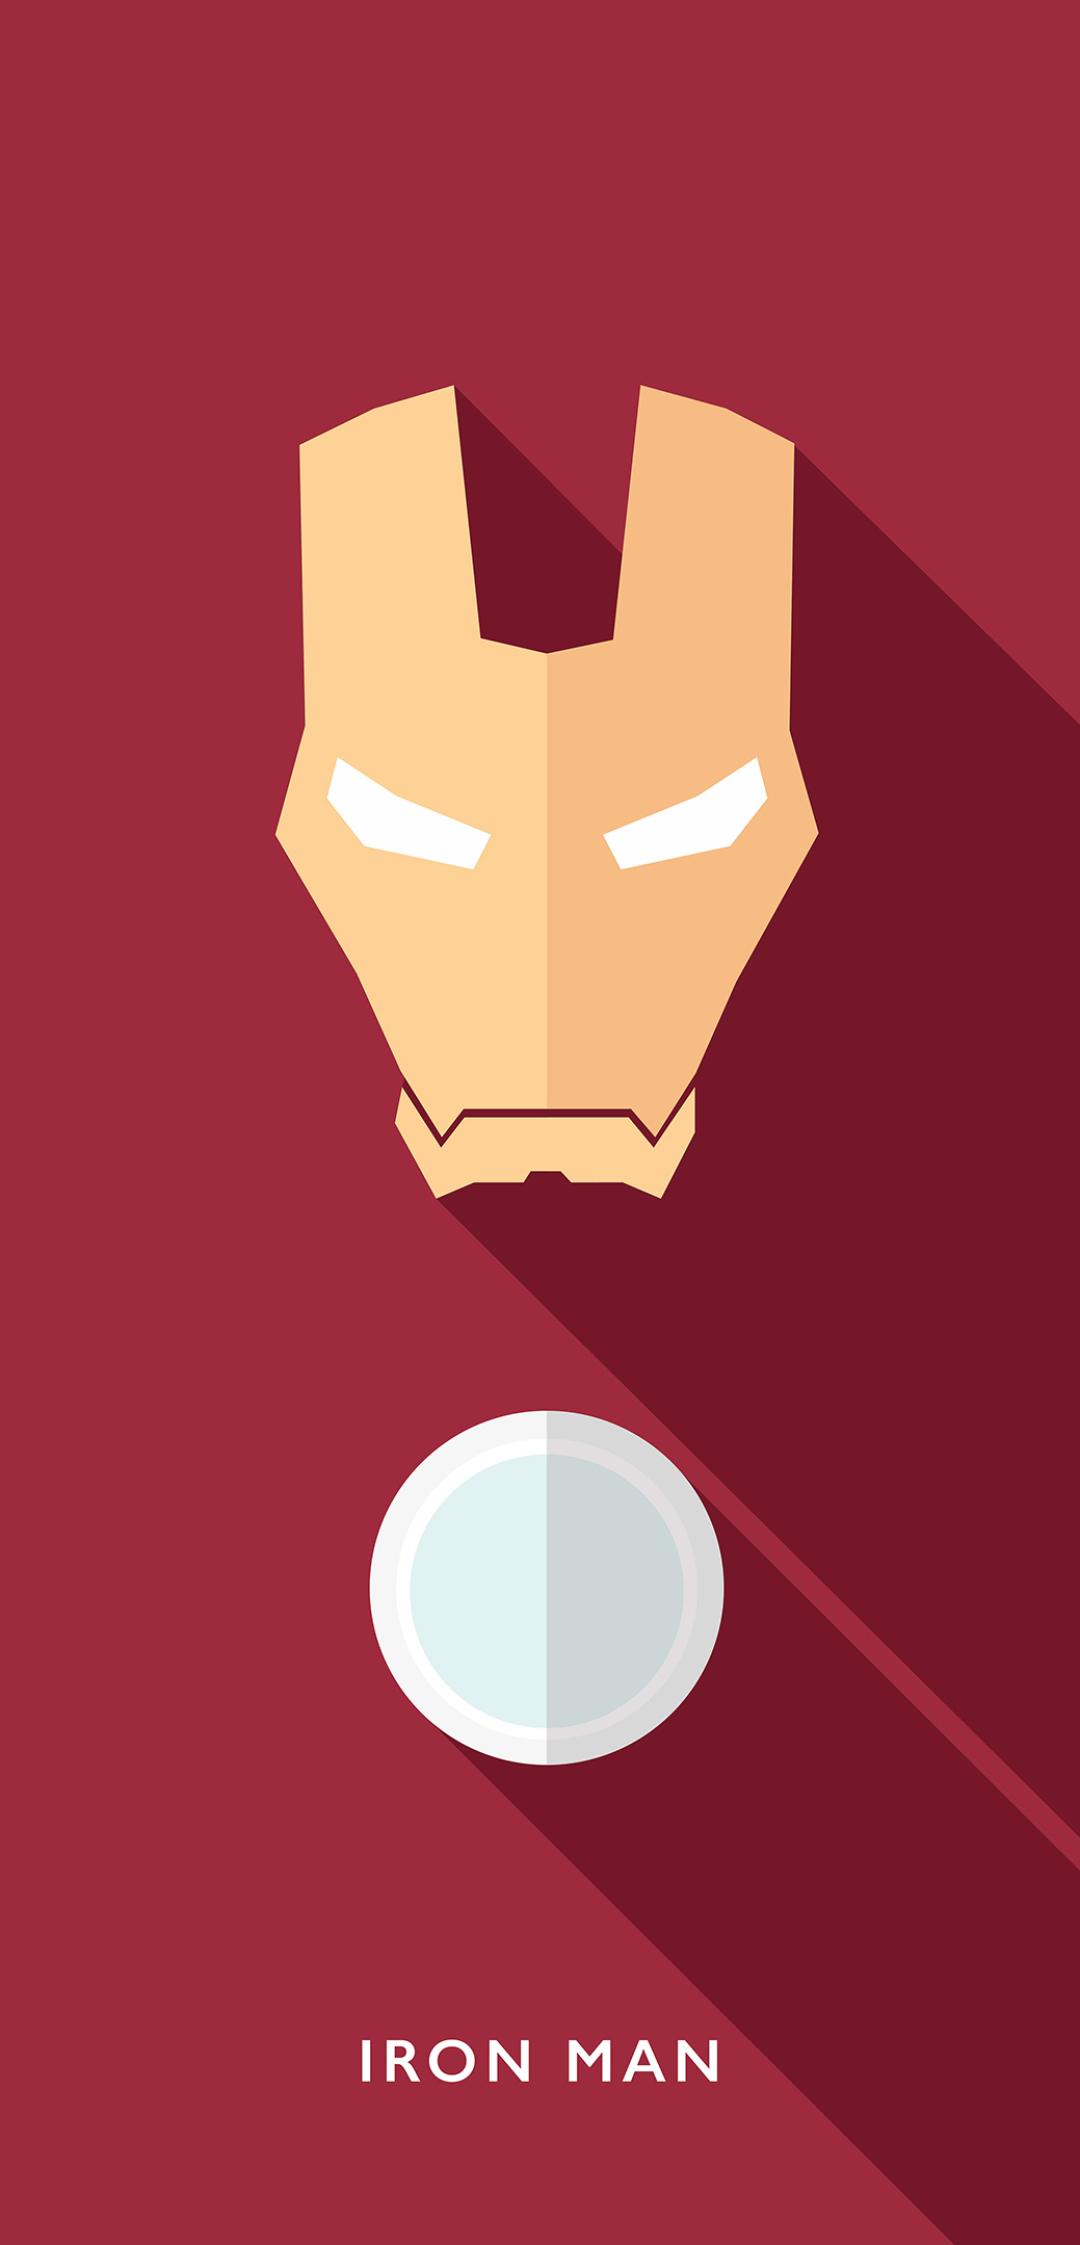 Iron Man Phone Wallpaper by Jarno van der Geest   Mobile Abyss